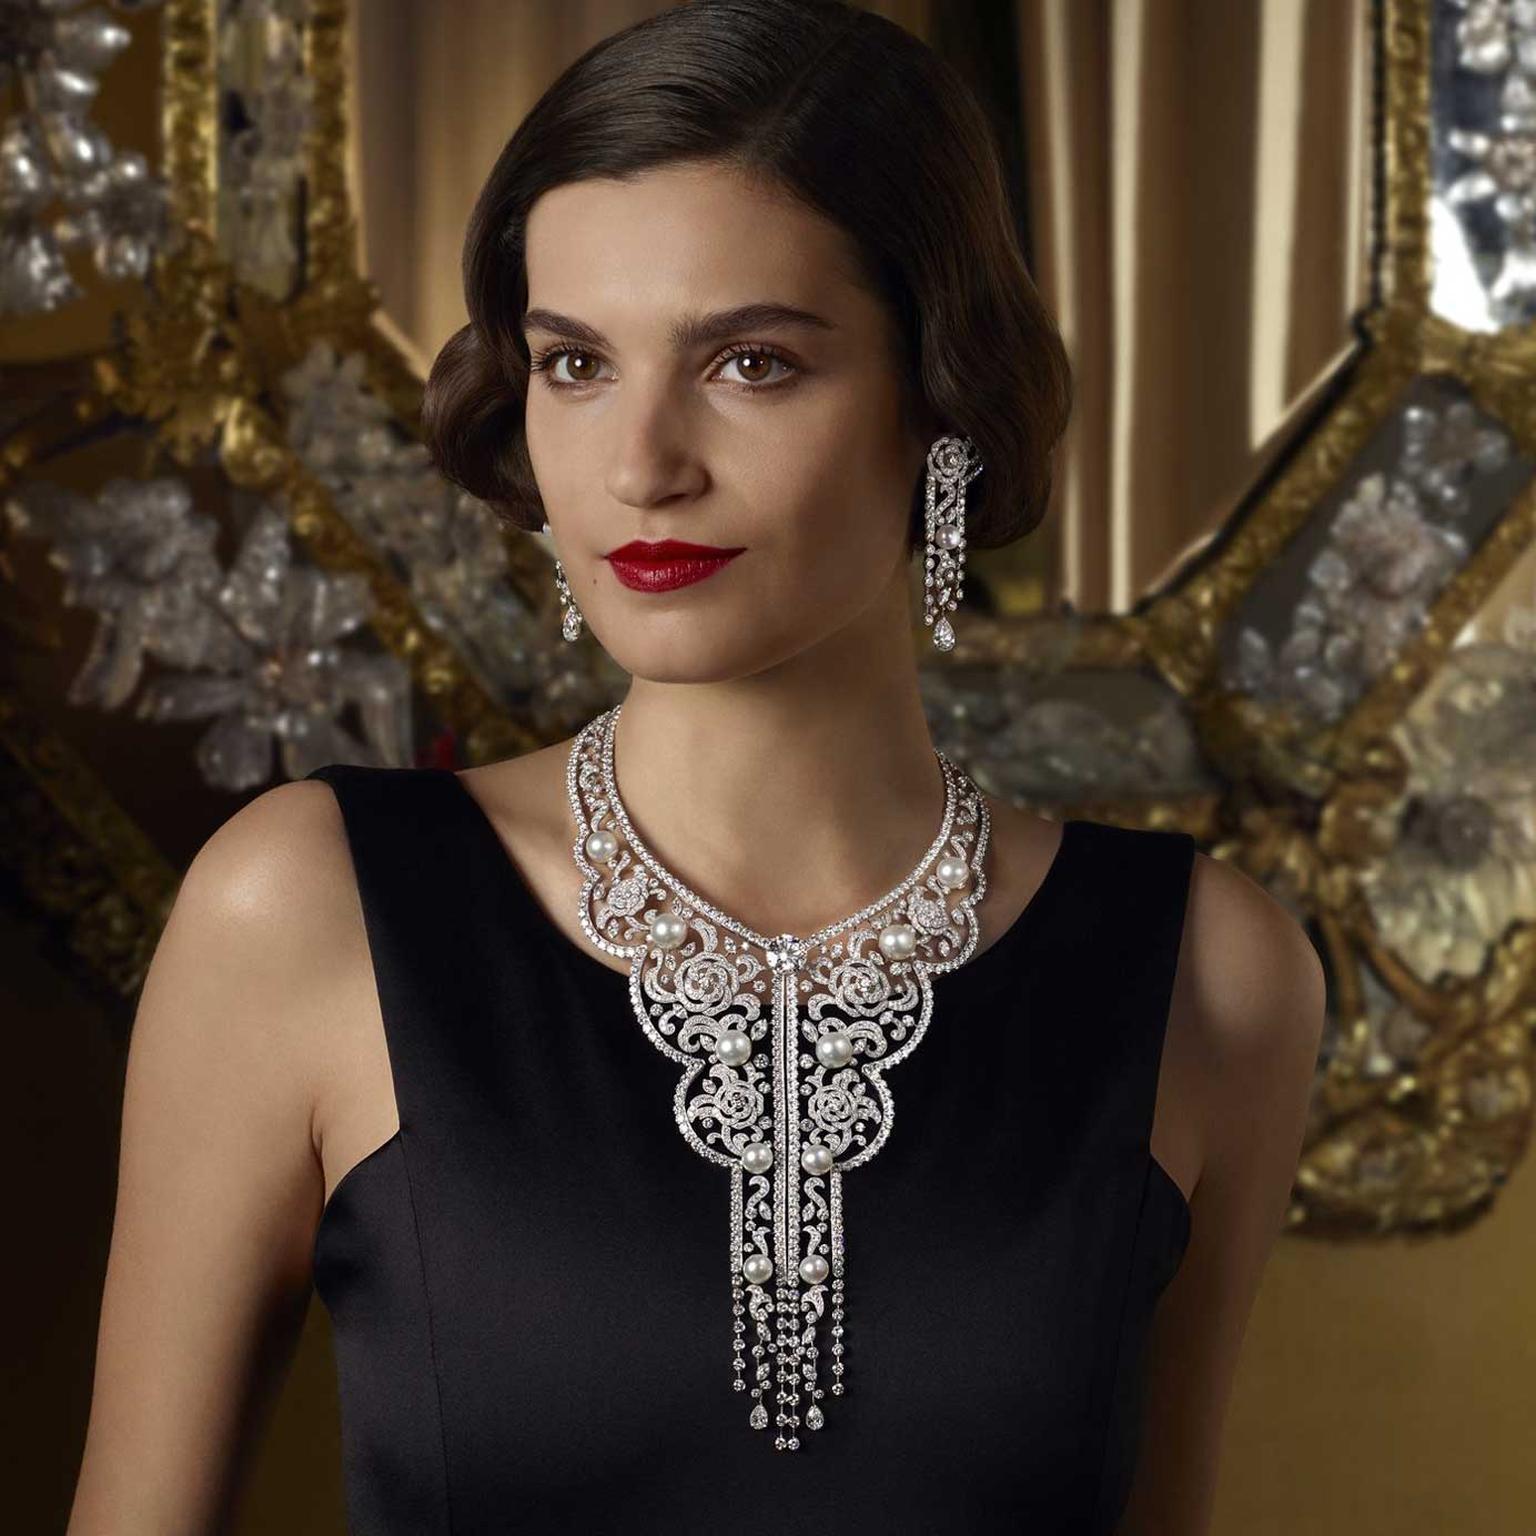 Fashion power houses debut new high jewellery collections